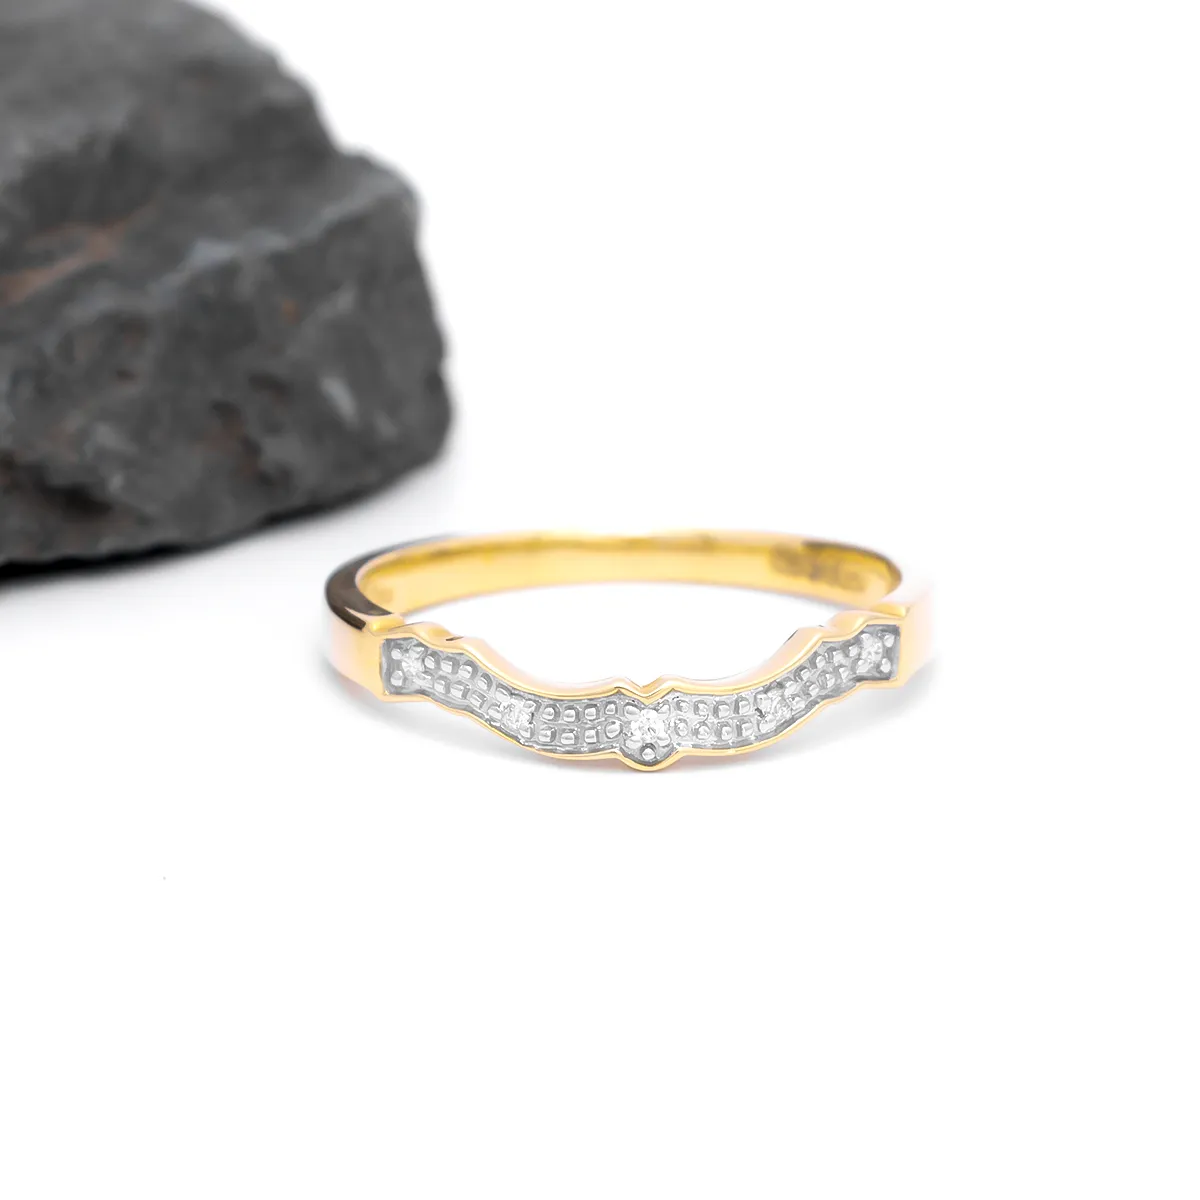 Shaped Wedding Band to Match Claddagh Engagement Ring - Yellow Gold